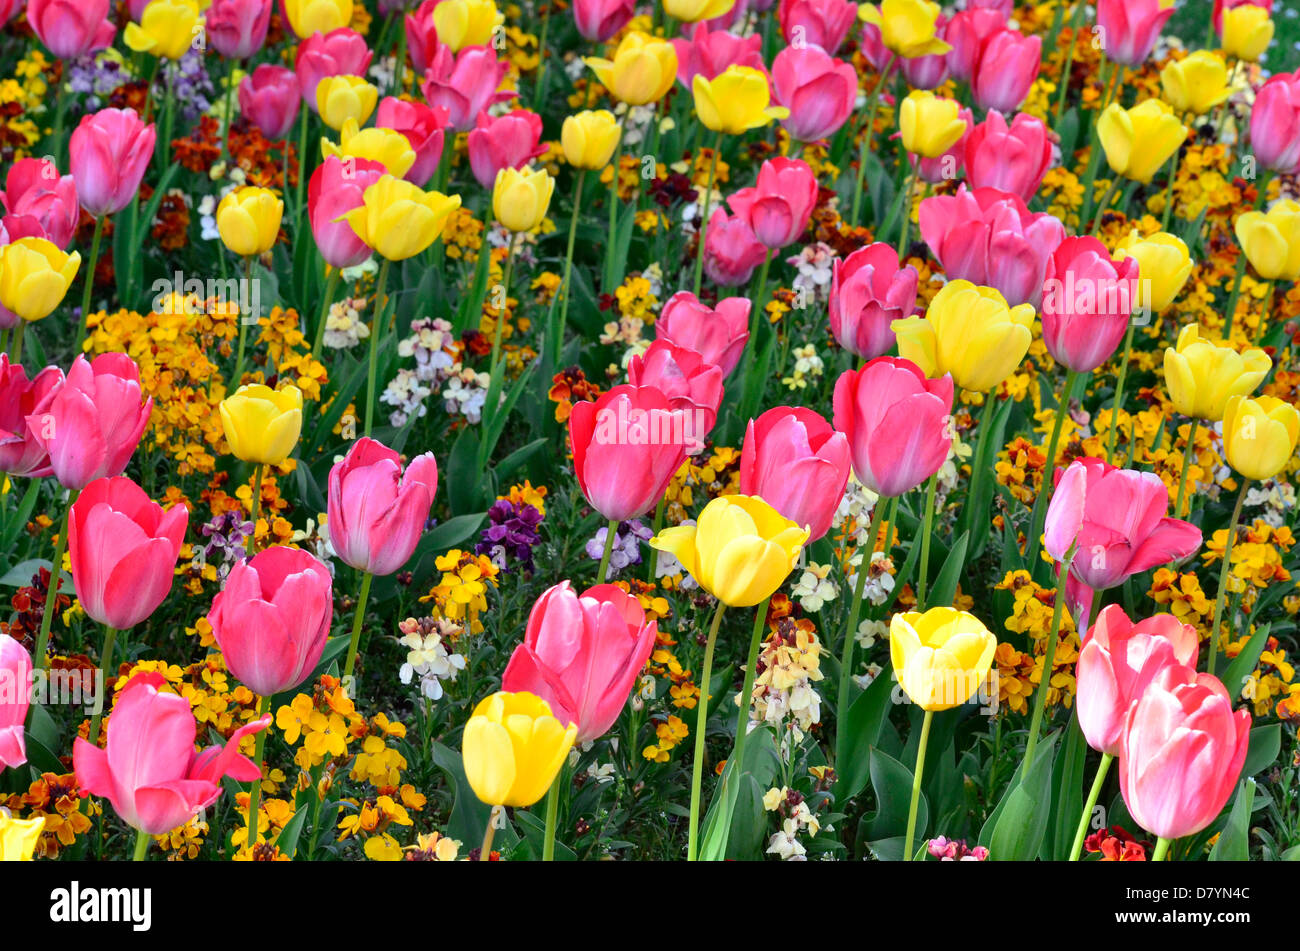 Brightly colored tulips seen in full bloom in the City of Bristol UK. Stock Photo